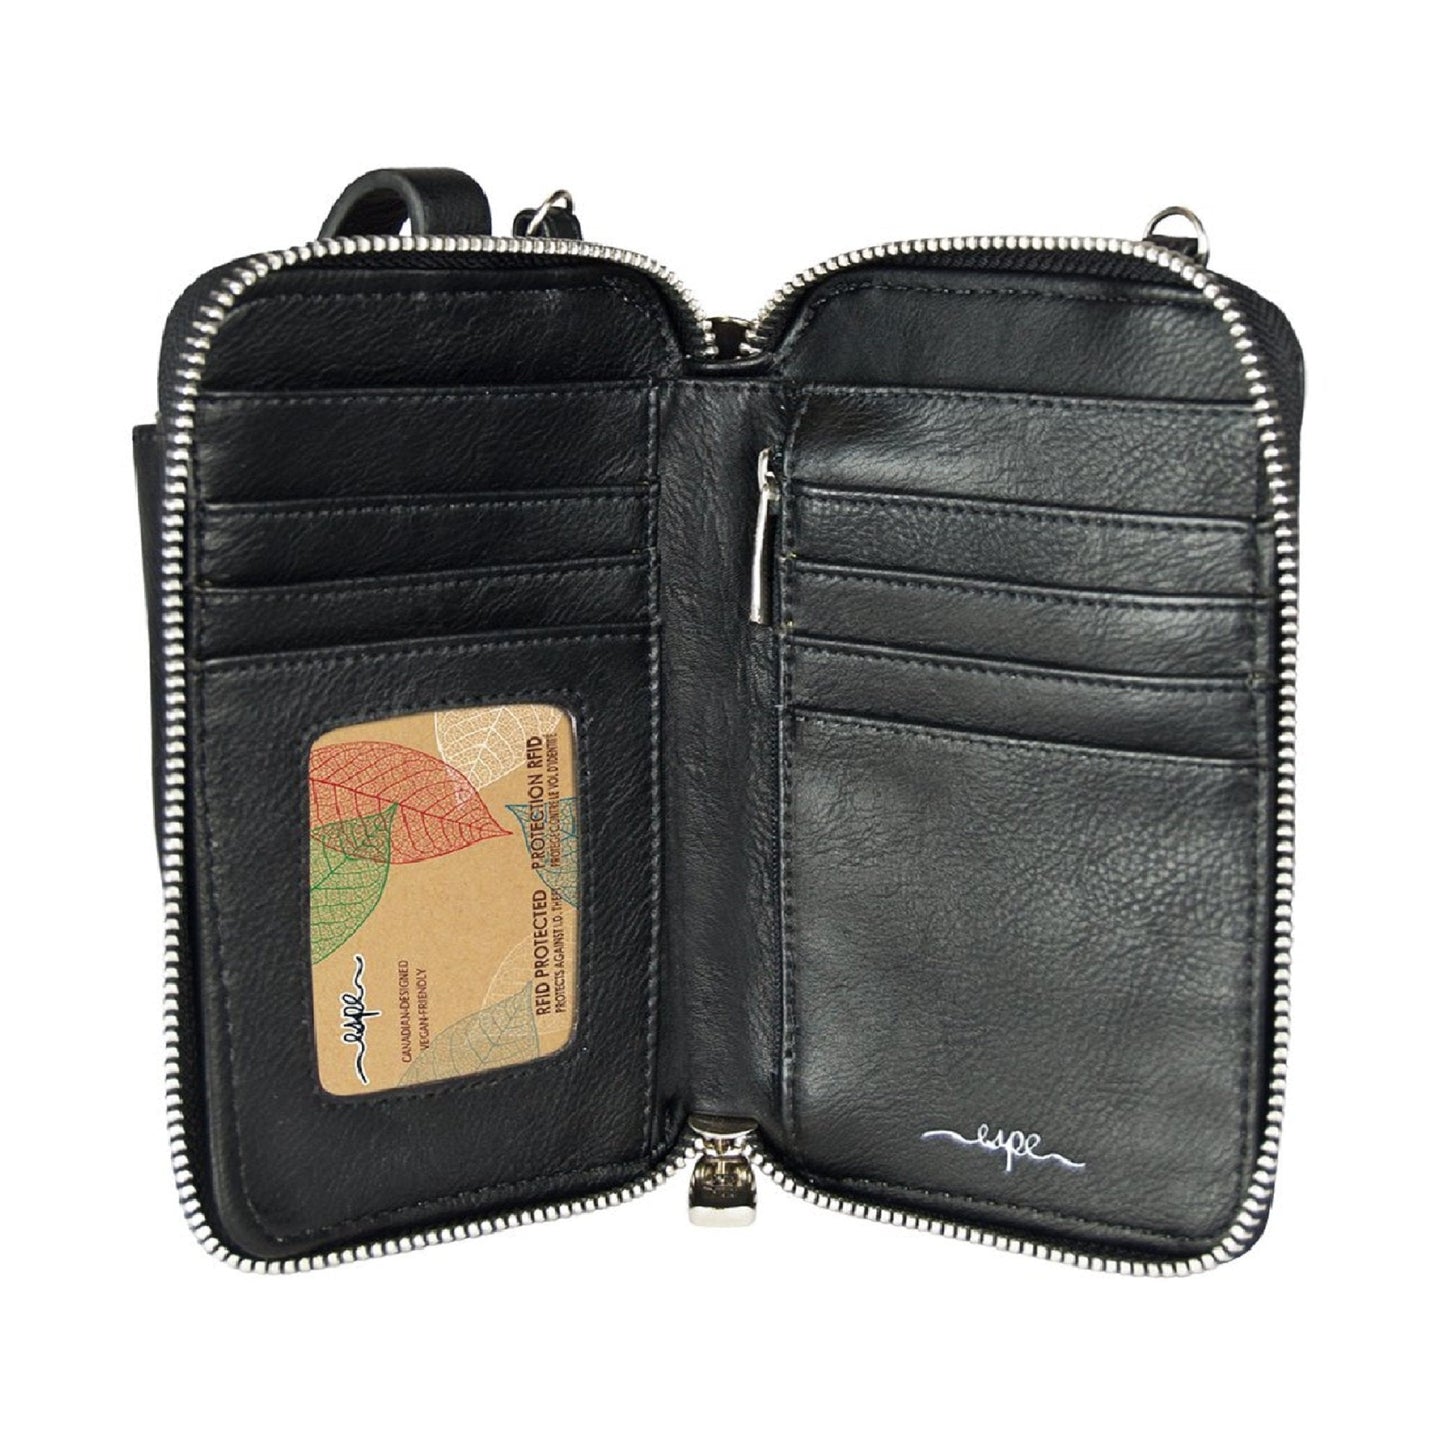 Meadow Smartphone Pouch - Black